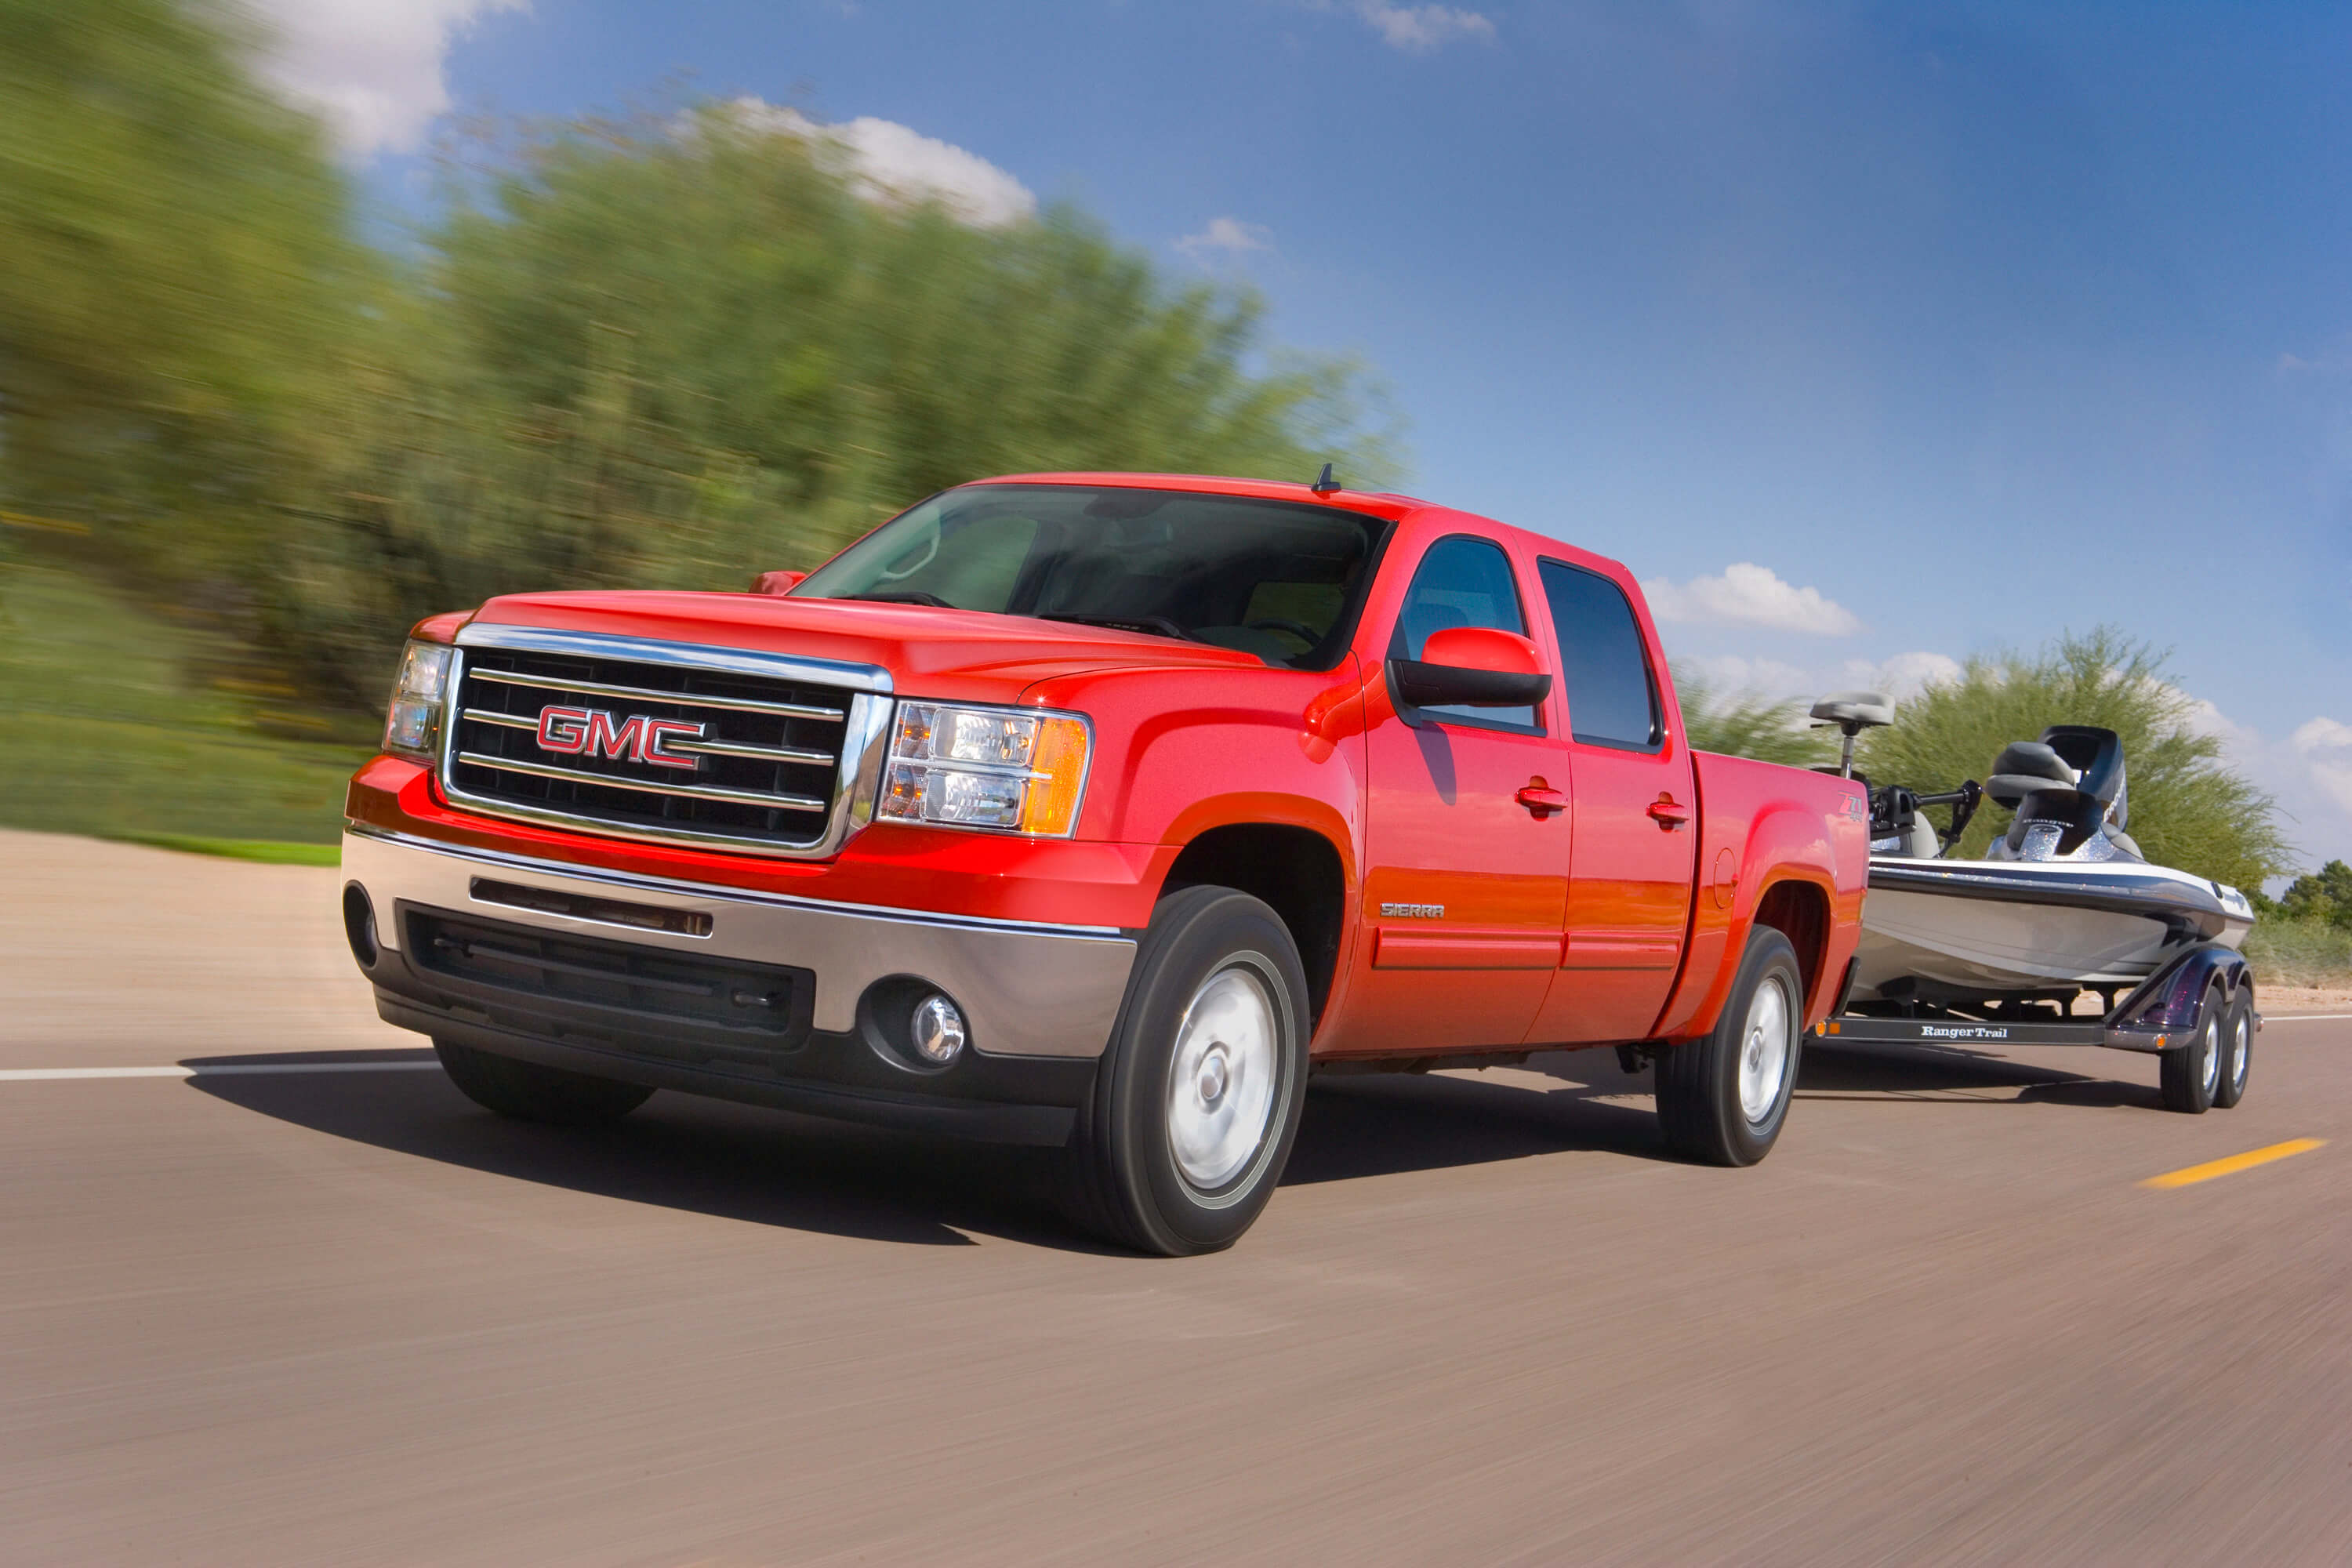 Promo photo of a red 2013 GMC Sierra 1500, a truck with relatively few engine issues, towing a boat down a rural road with trees in the background.